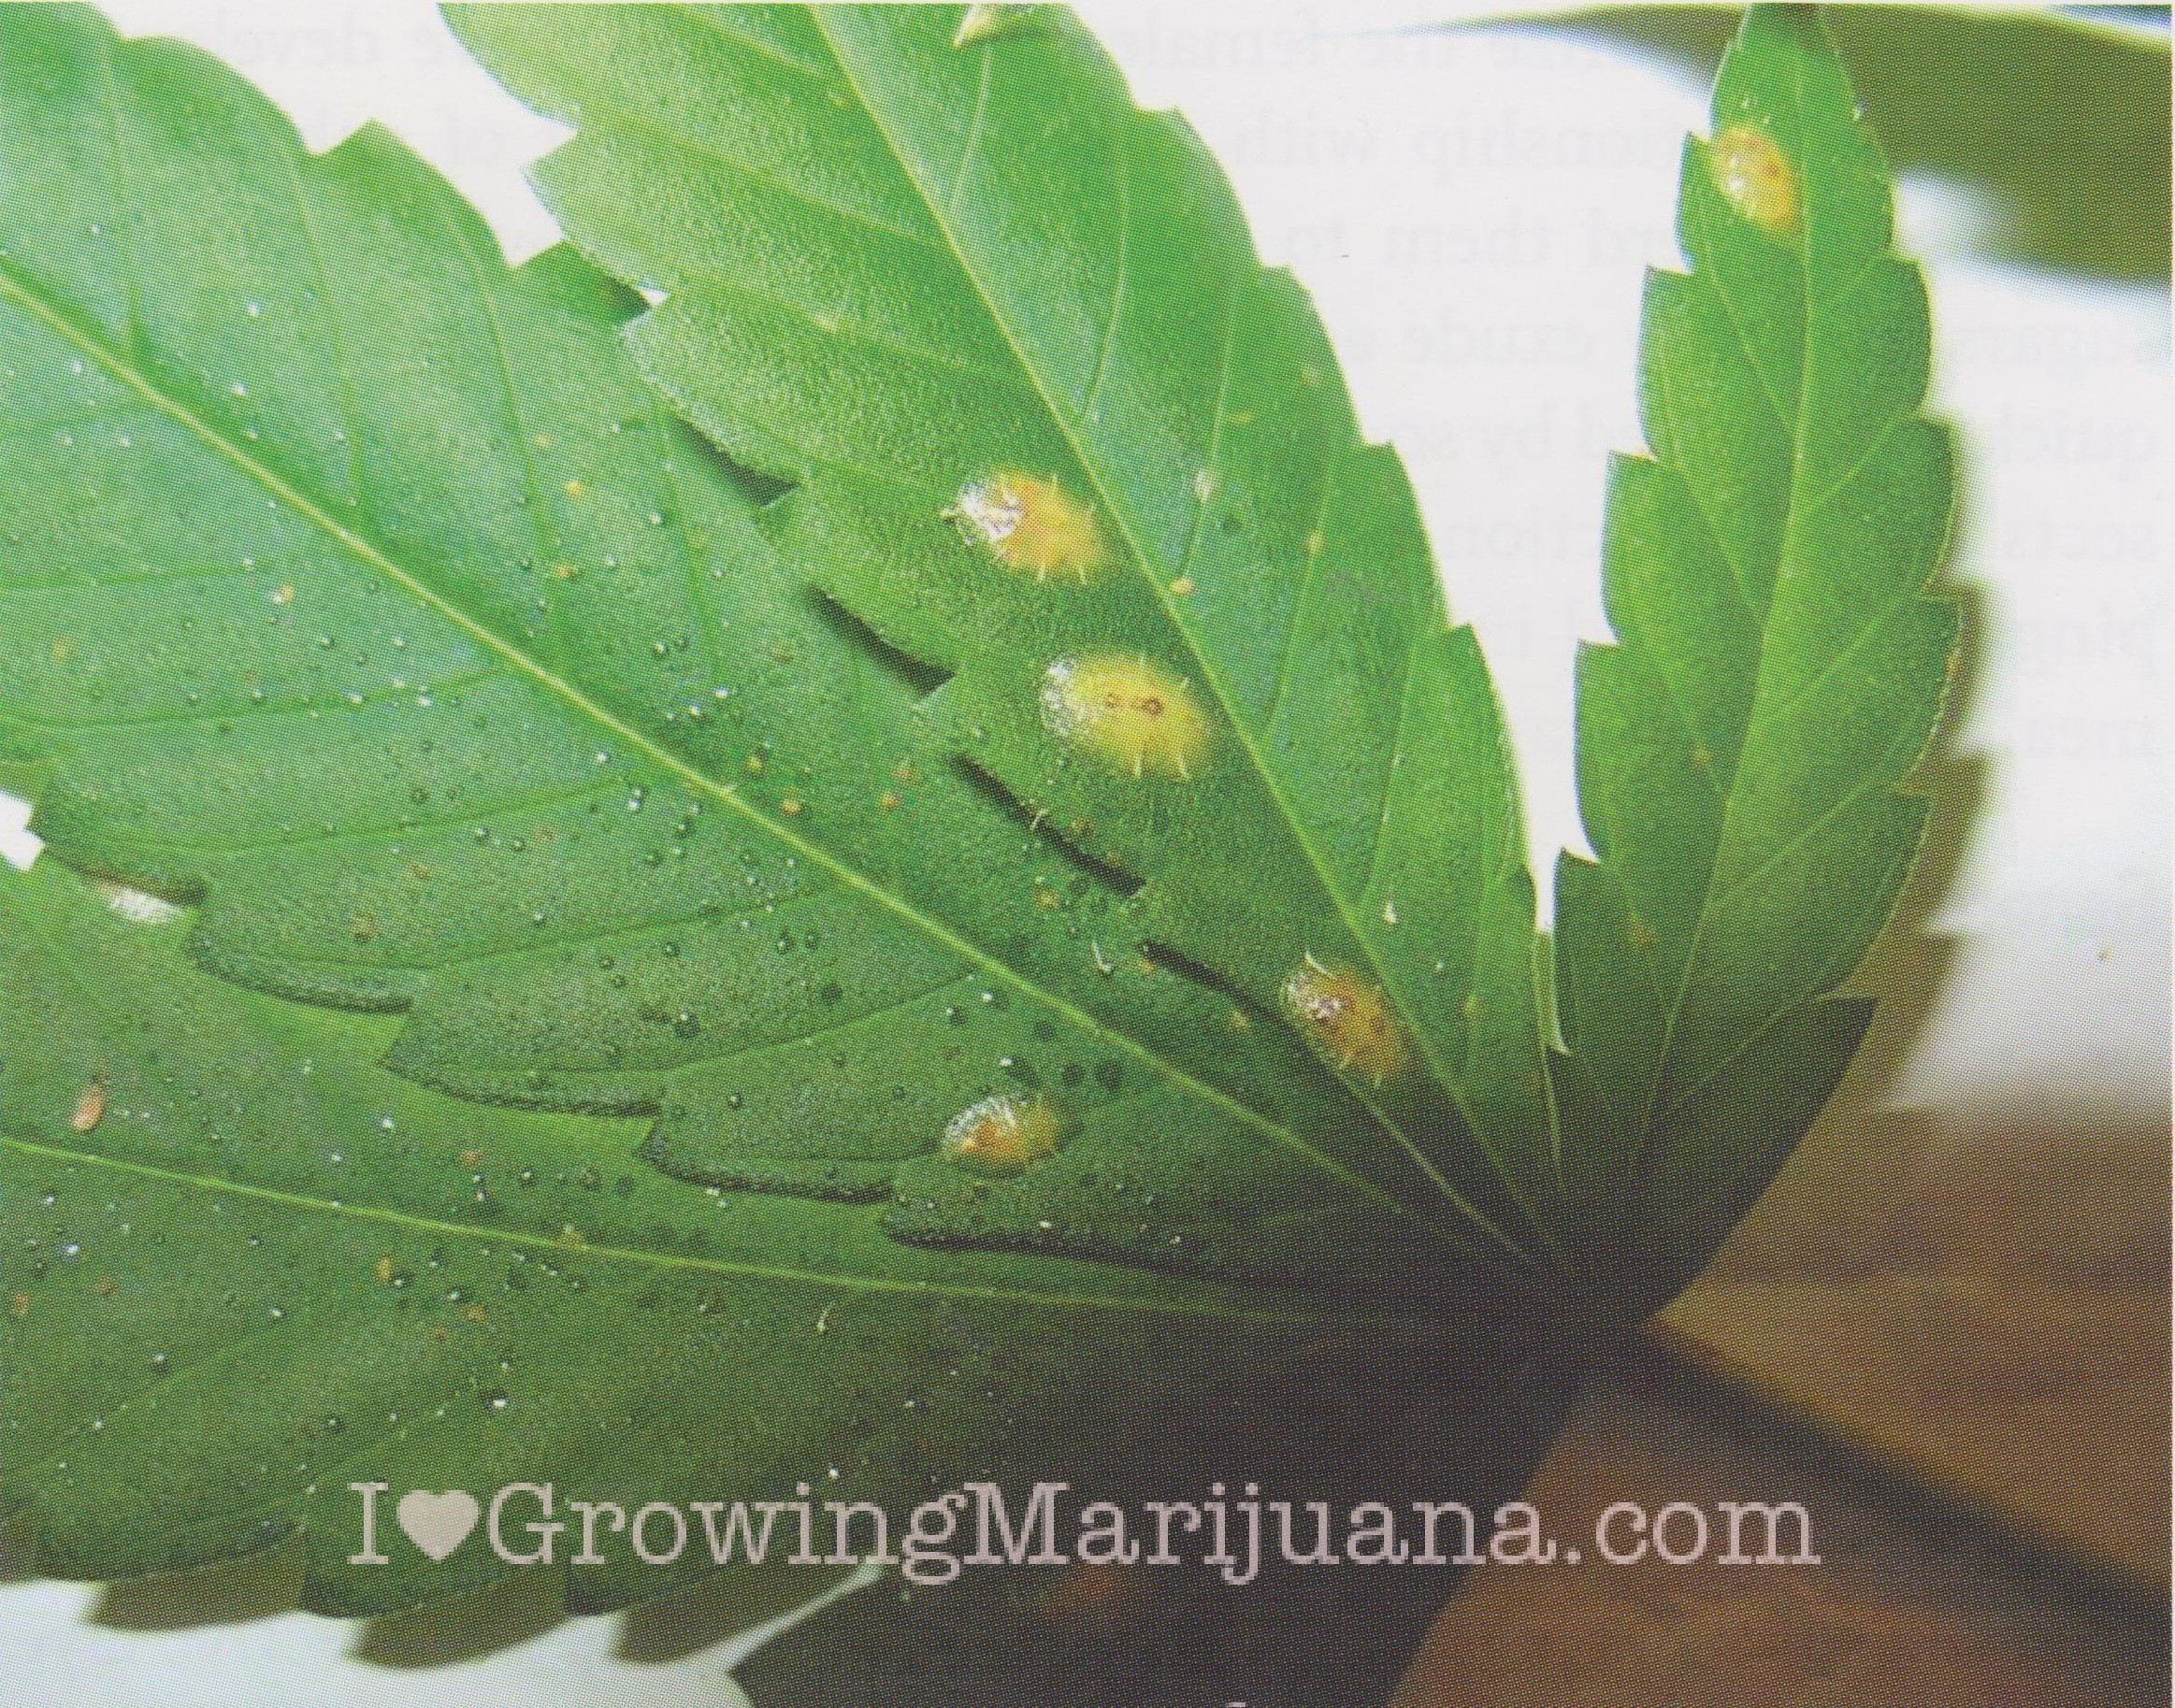 Marijuana Pests & Bugs - Control And Identification | Cannabis and ...